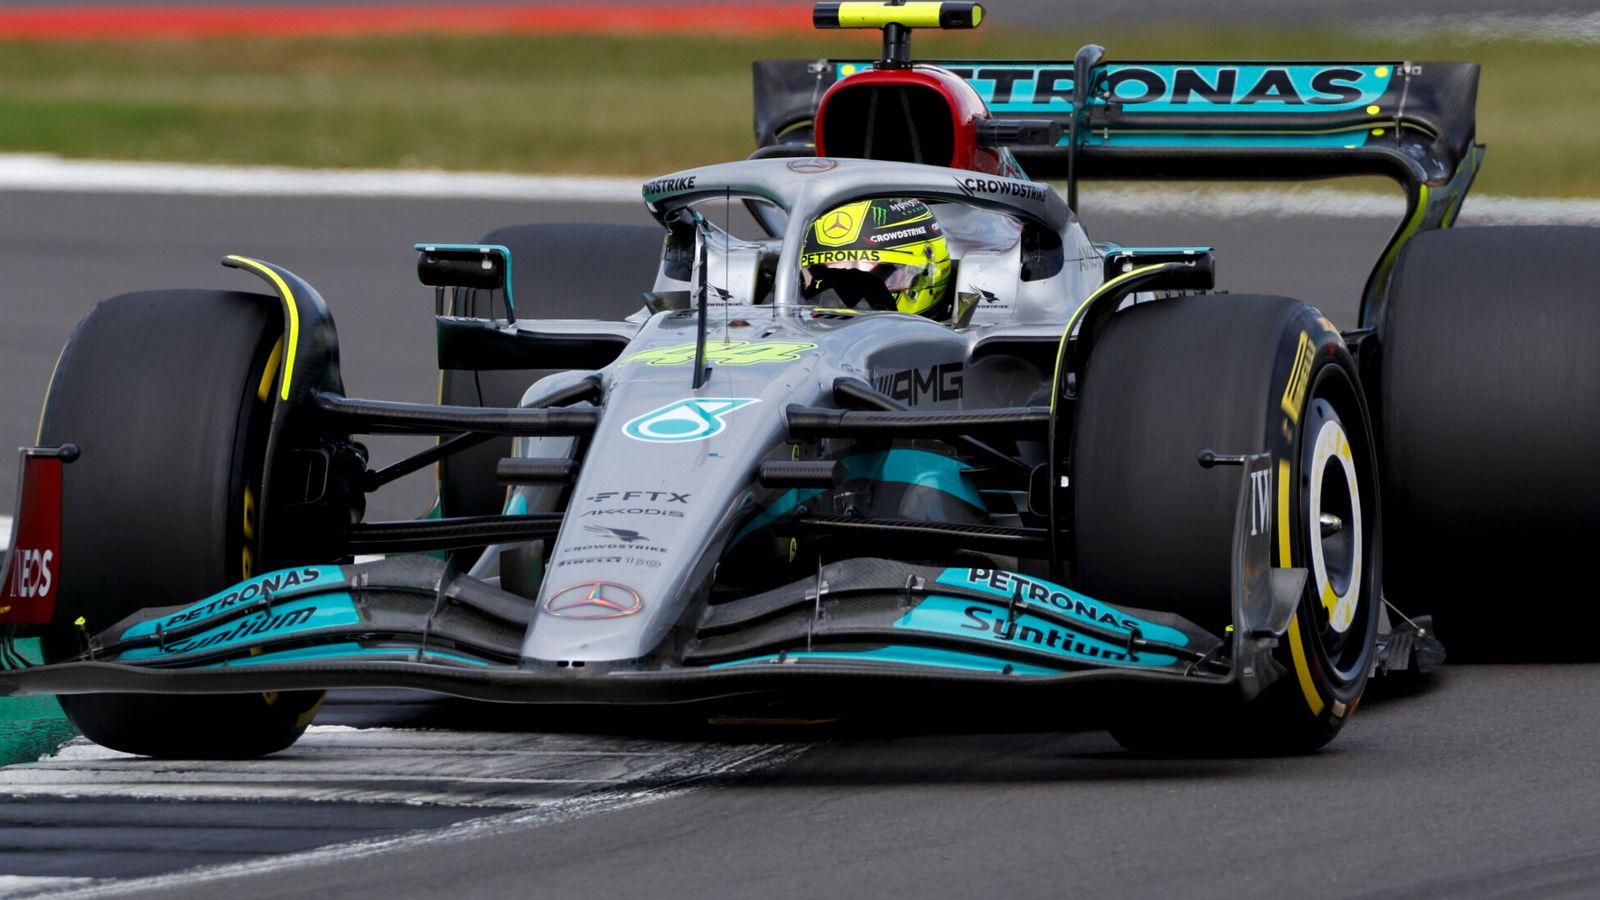 Mercedes at the Austrian GP: ‘Back in the game’ after competitive Silverstone, or trailing rivals again?